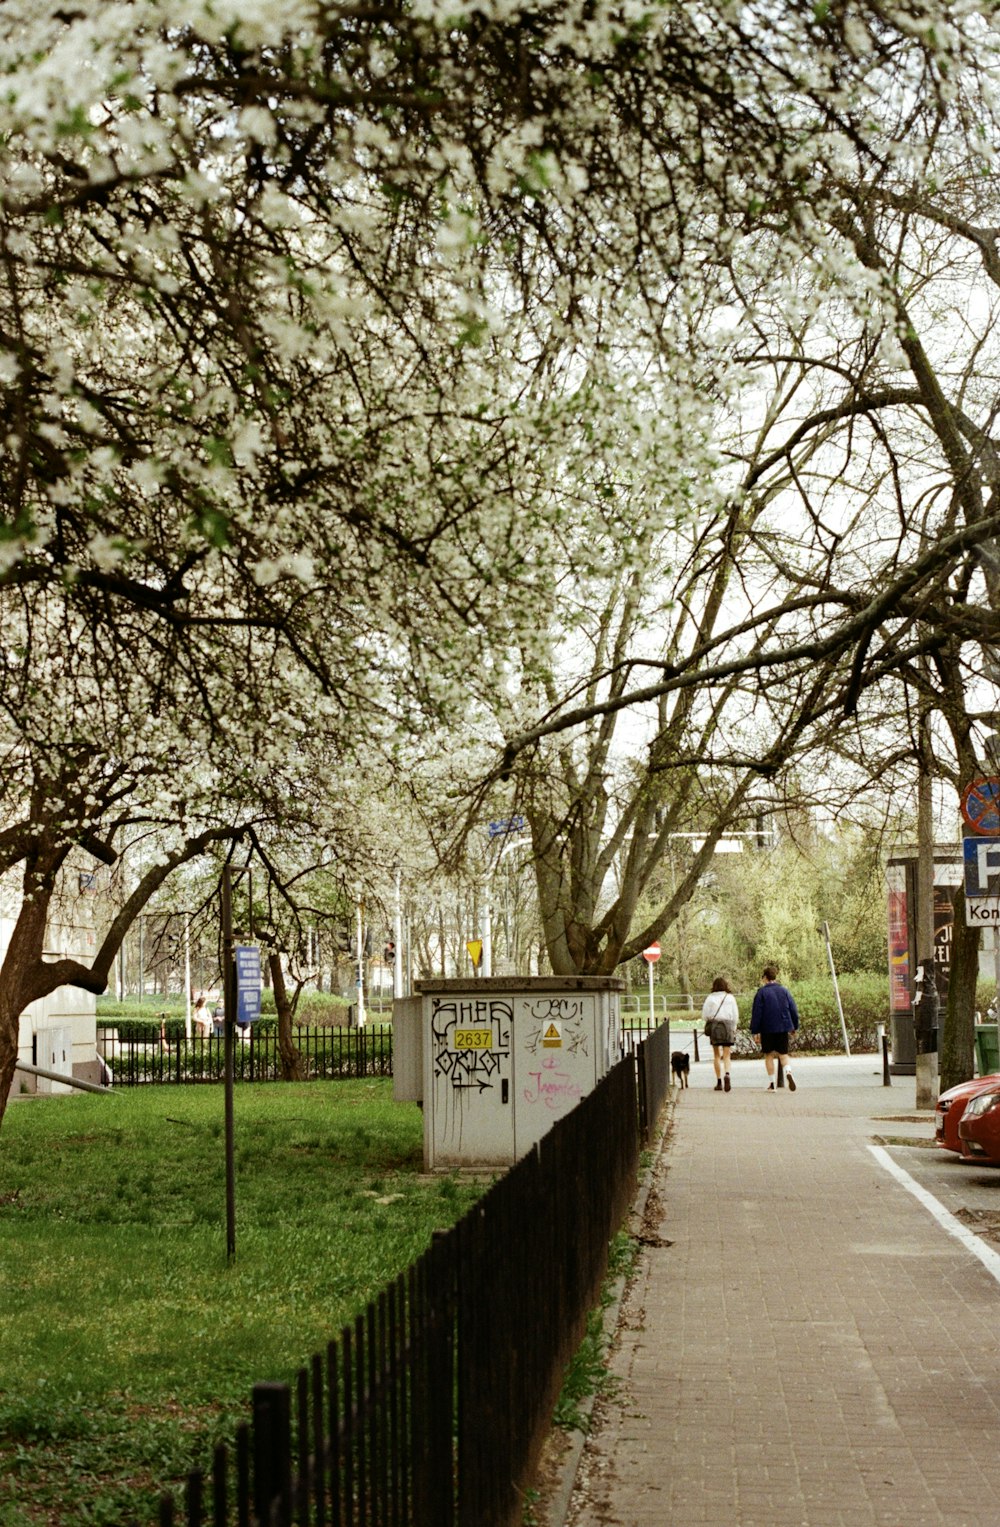 a tree with white flowers on it next to a sidewalk